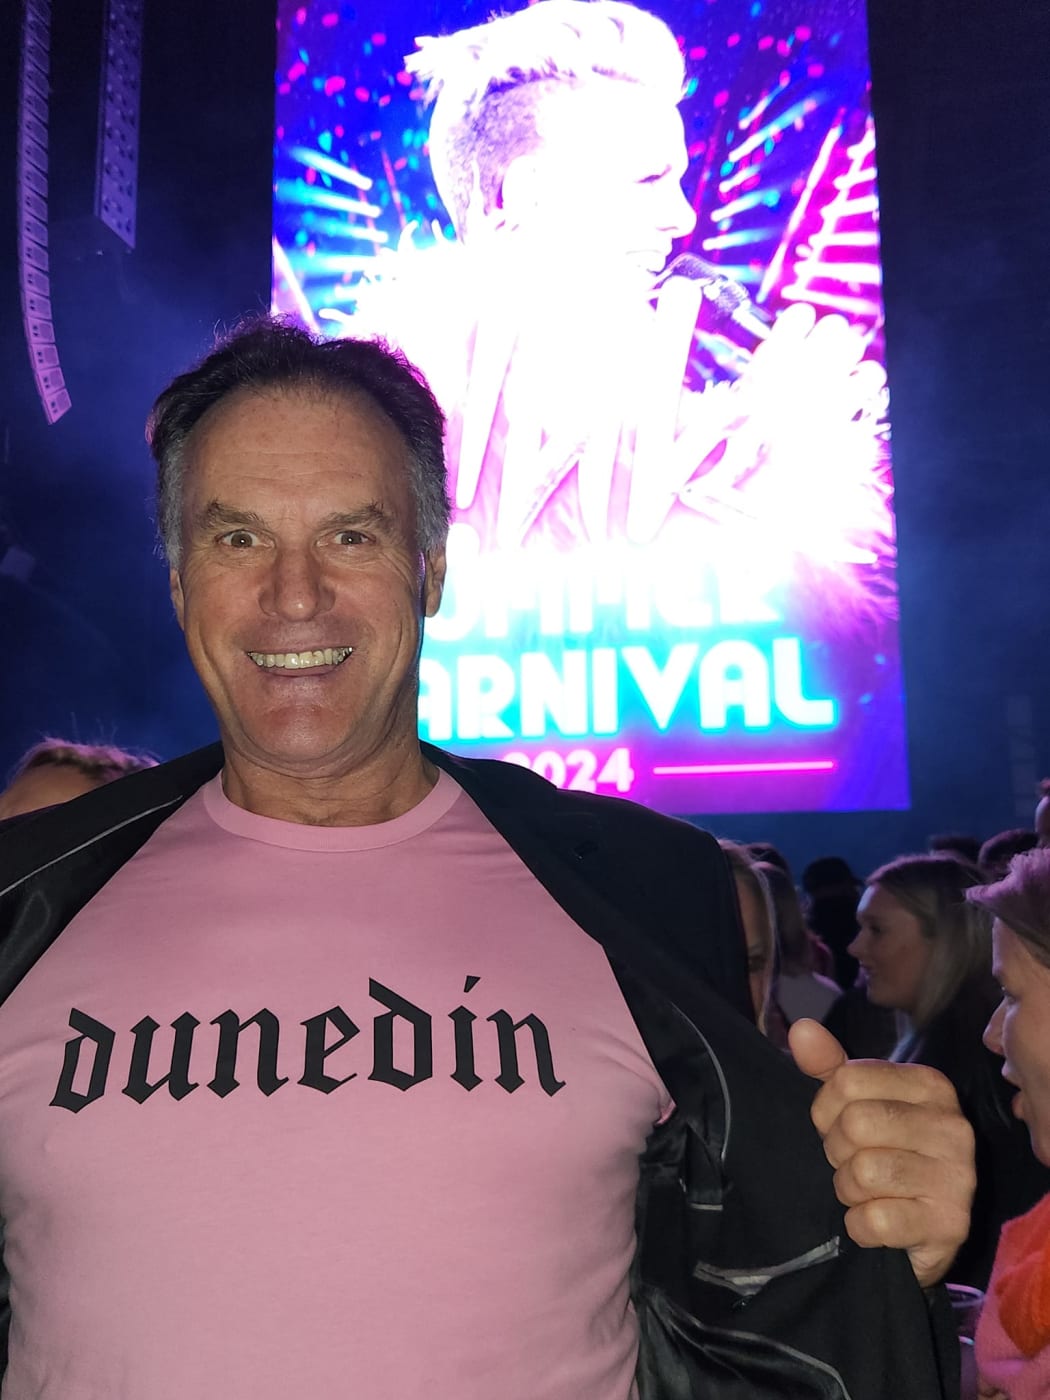 Jules Radich smiles broadly at the camera. He holds his jacket open to show a pink tshirt with the gothic logo "DUNEDIN". He is standing in the mosh of the Pink concert. There are large bright screens behind him, and hundreds of people.